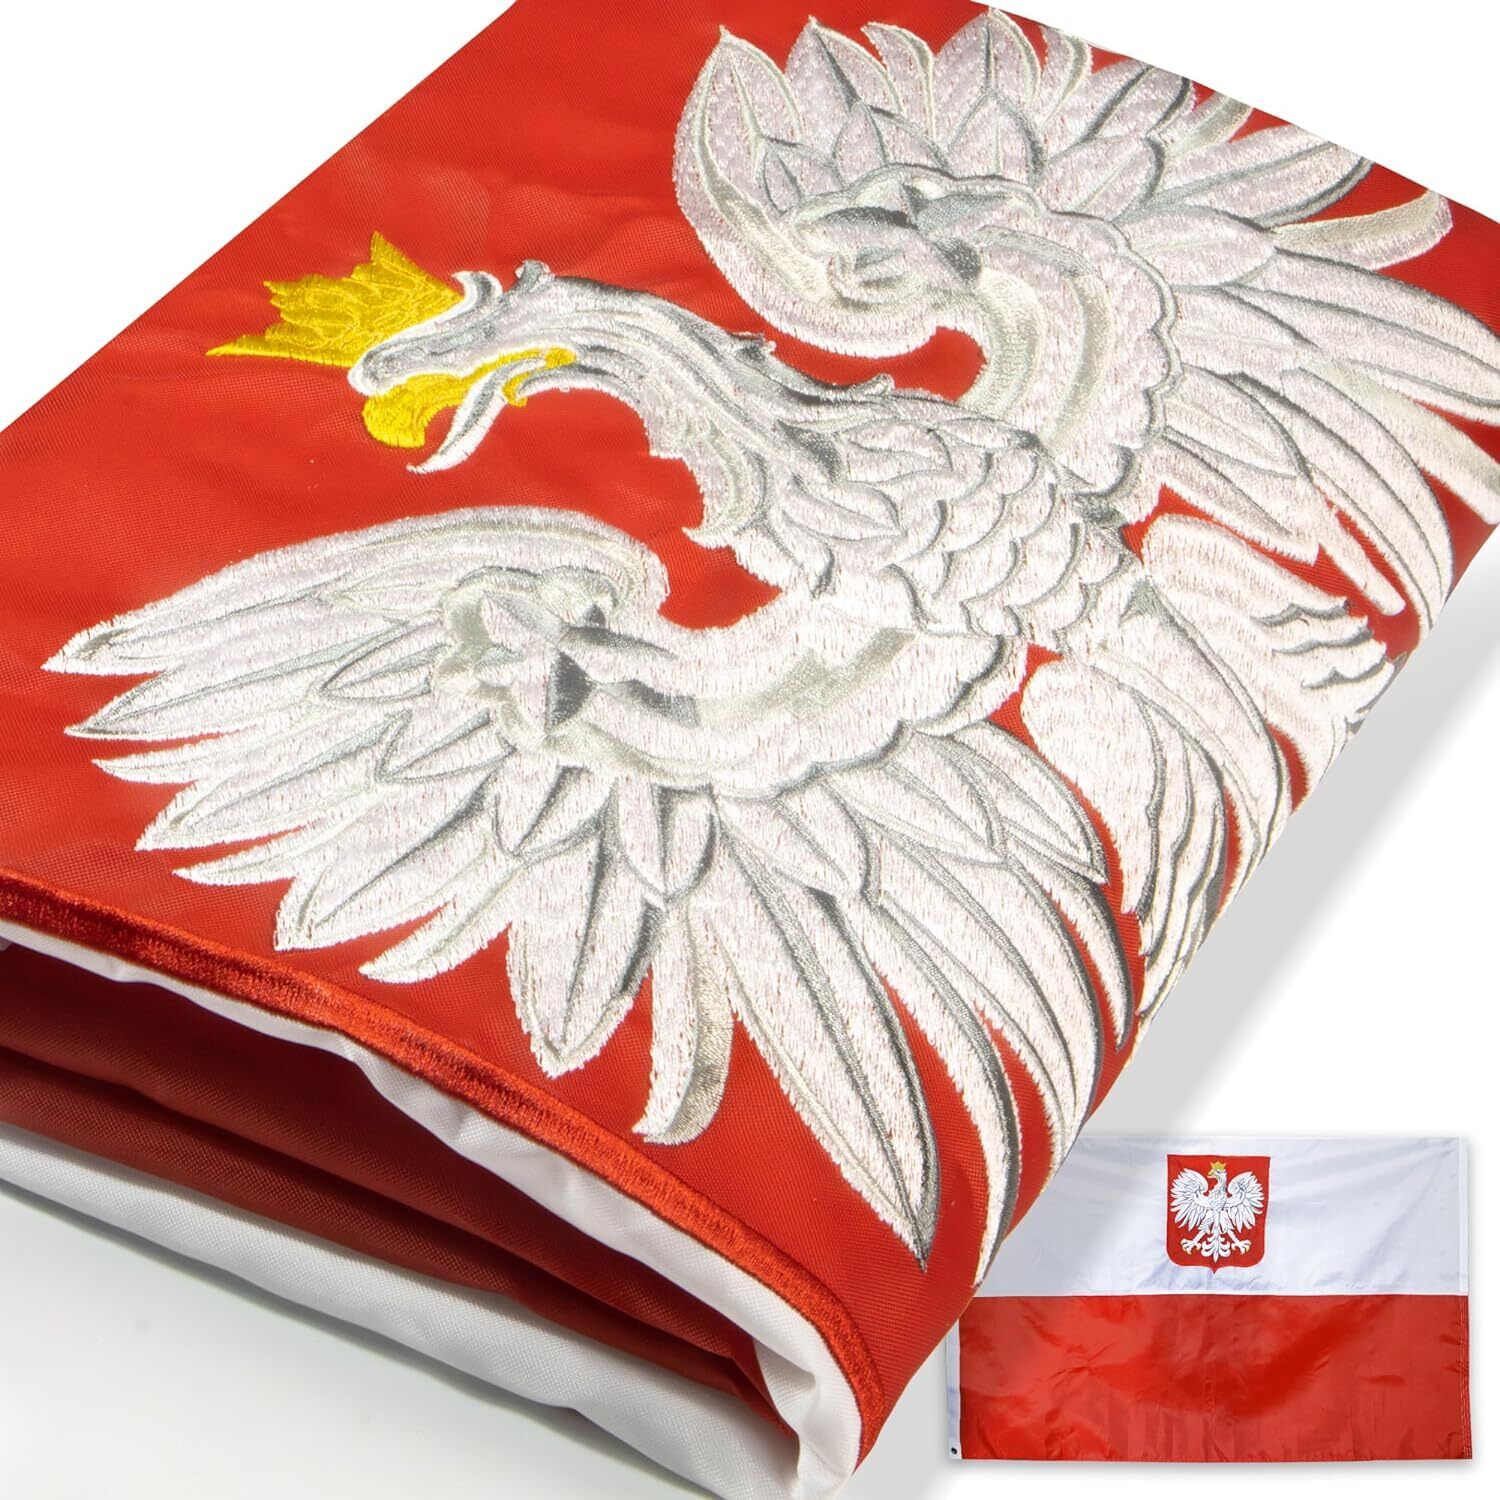 Anley EverStrong Series Poland State Ensign Flag Embroidered Polish Eagle Flags